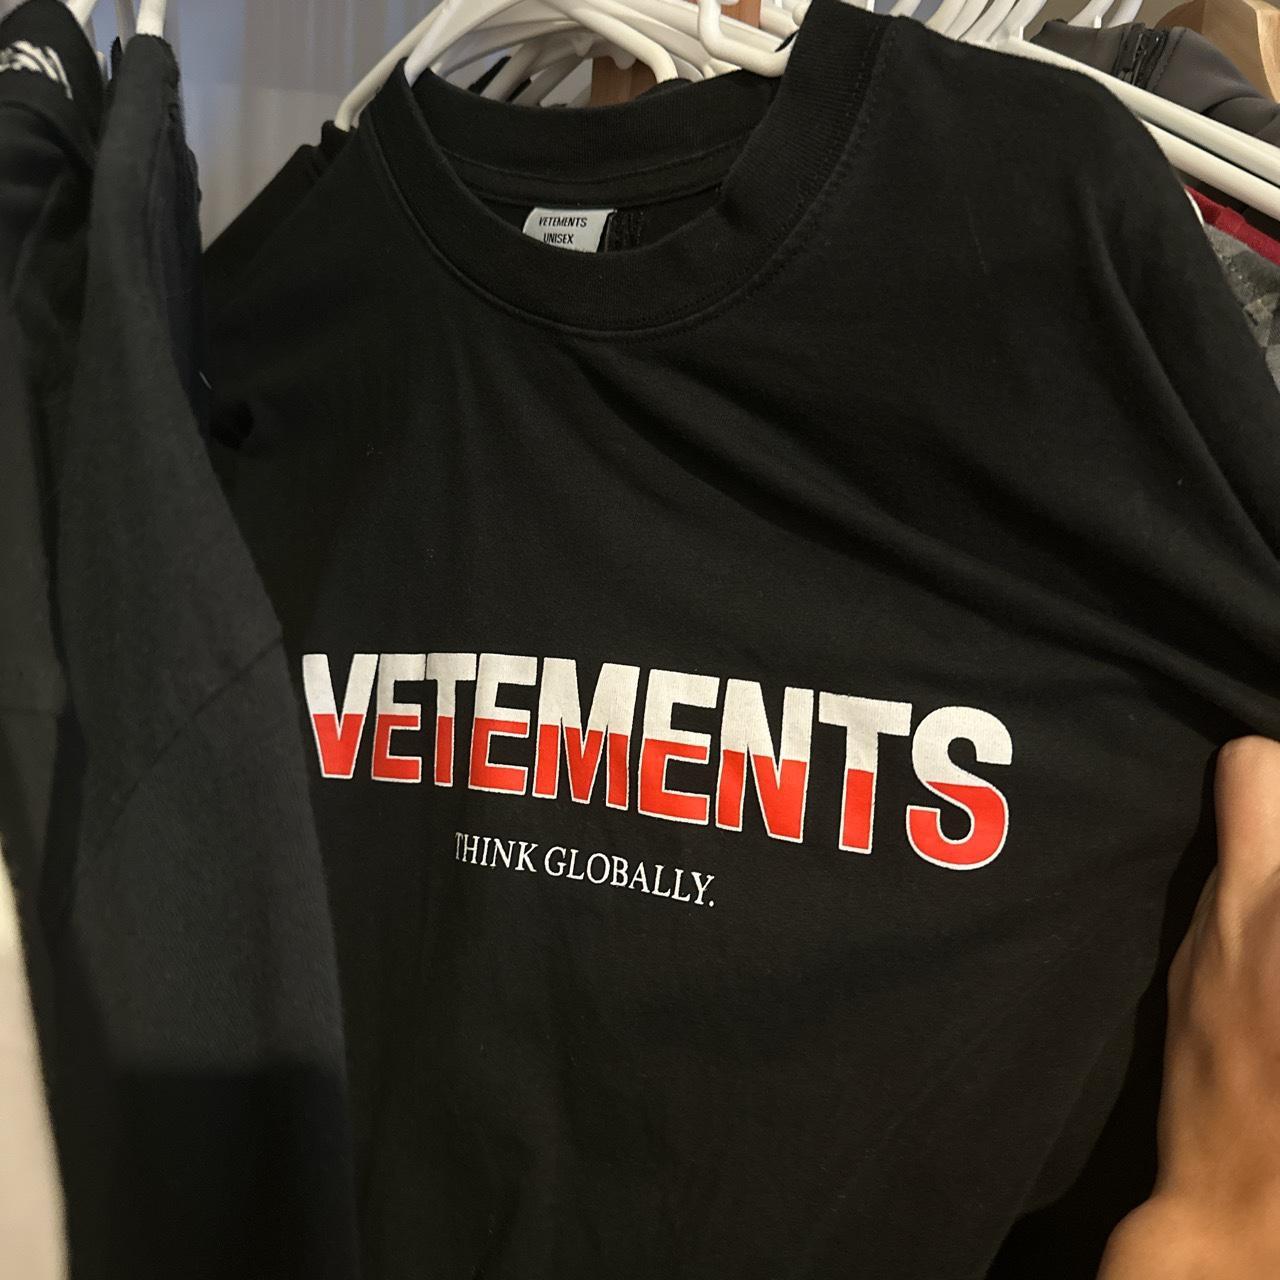 Vetements “Think globally” Poland tee. Not 100% sure... - Depop